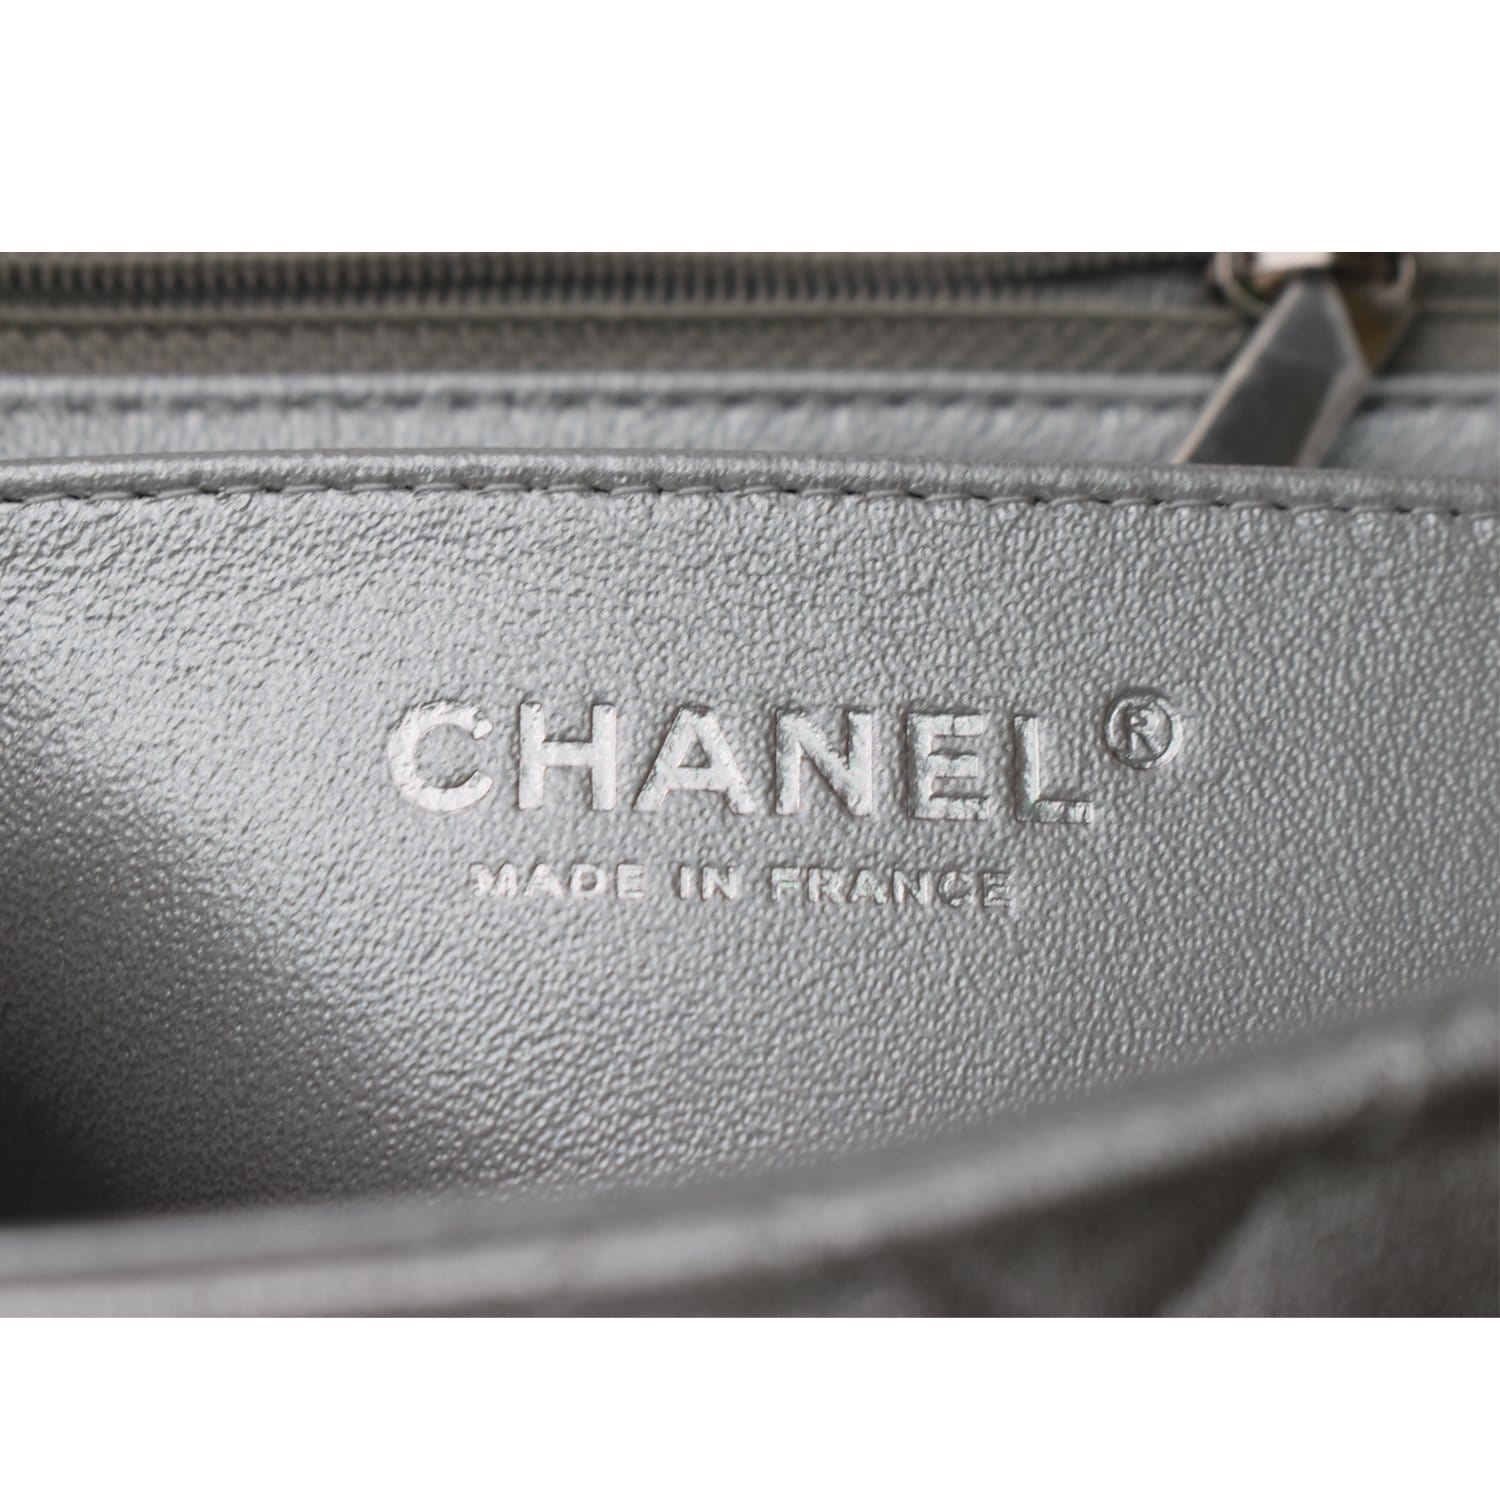 10 Steps You Can Take to Authenticate Any Chanel Bag